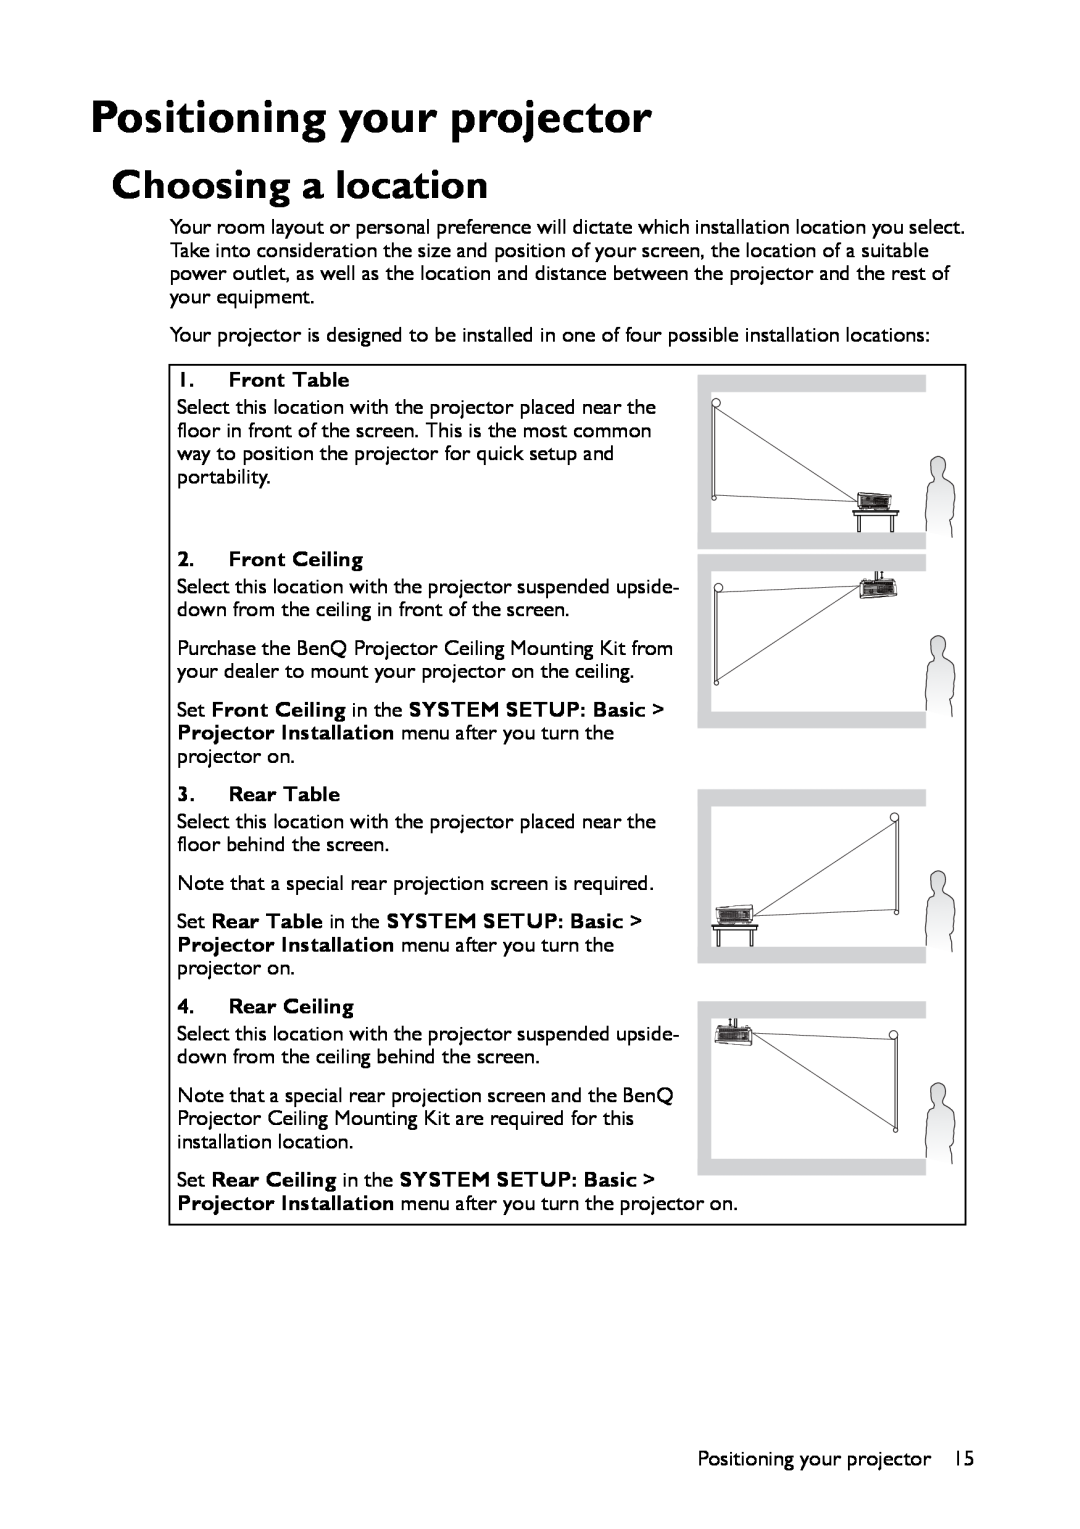 BenQ MX661 user manual Positioning your projector, Choosing a location 